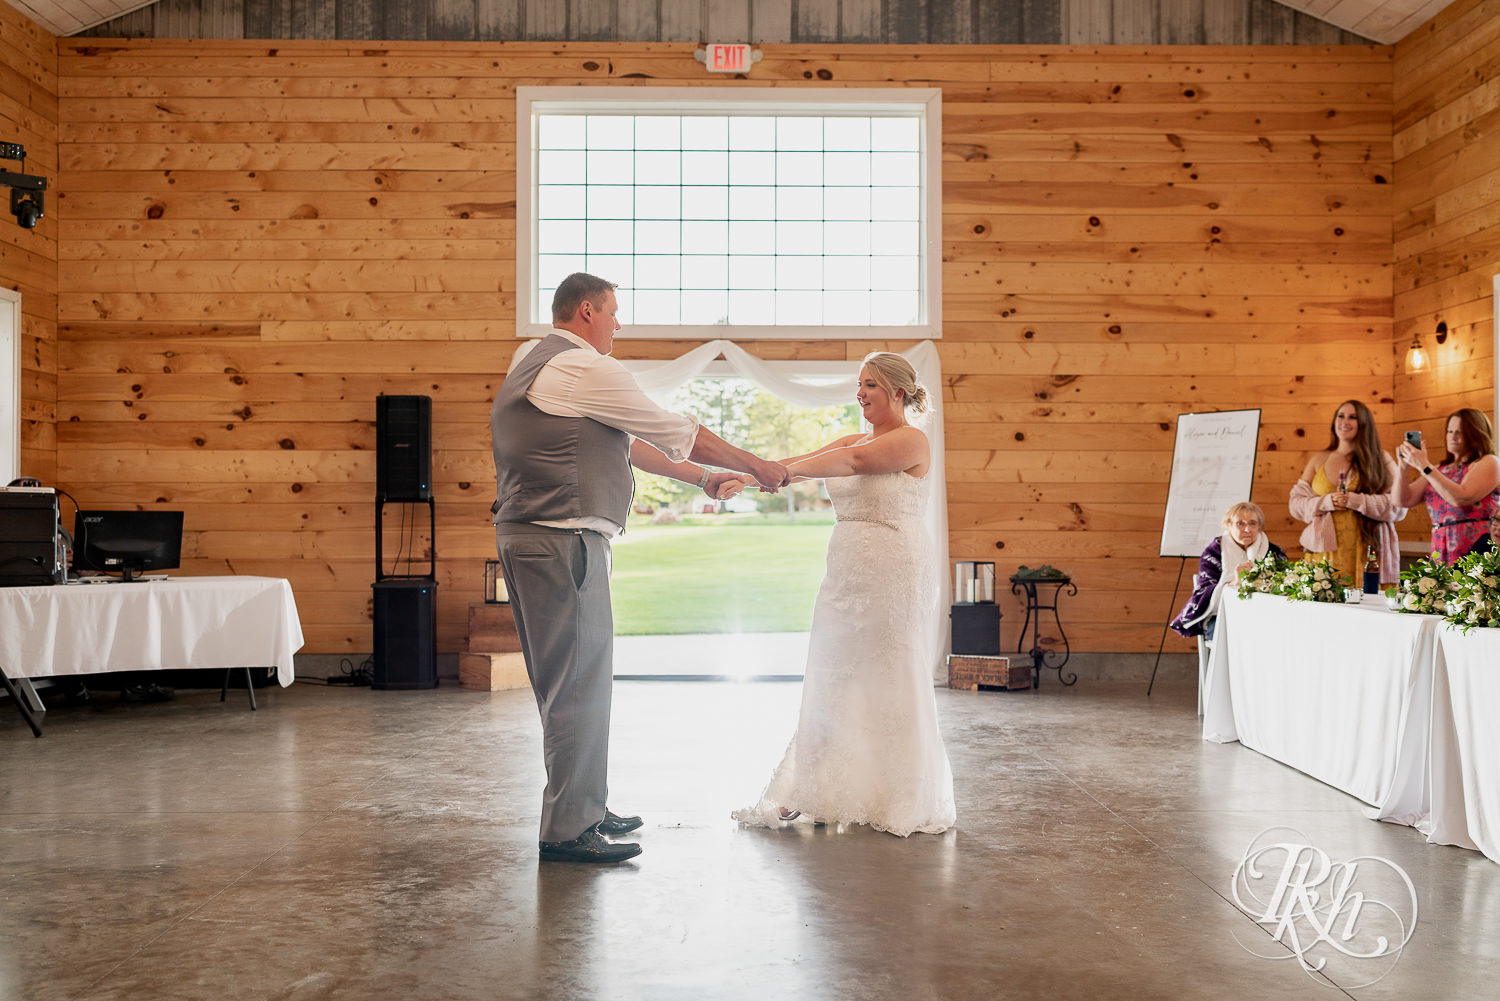 Bride and groom share first dance at Barn at Mirror Lake in Mondovi, Wisconsin.